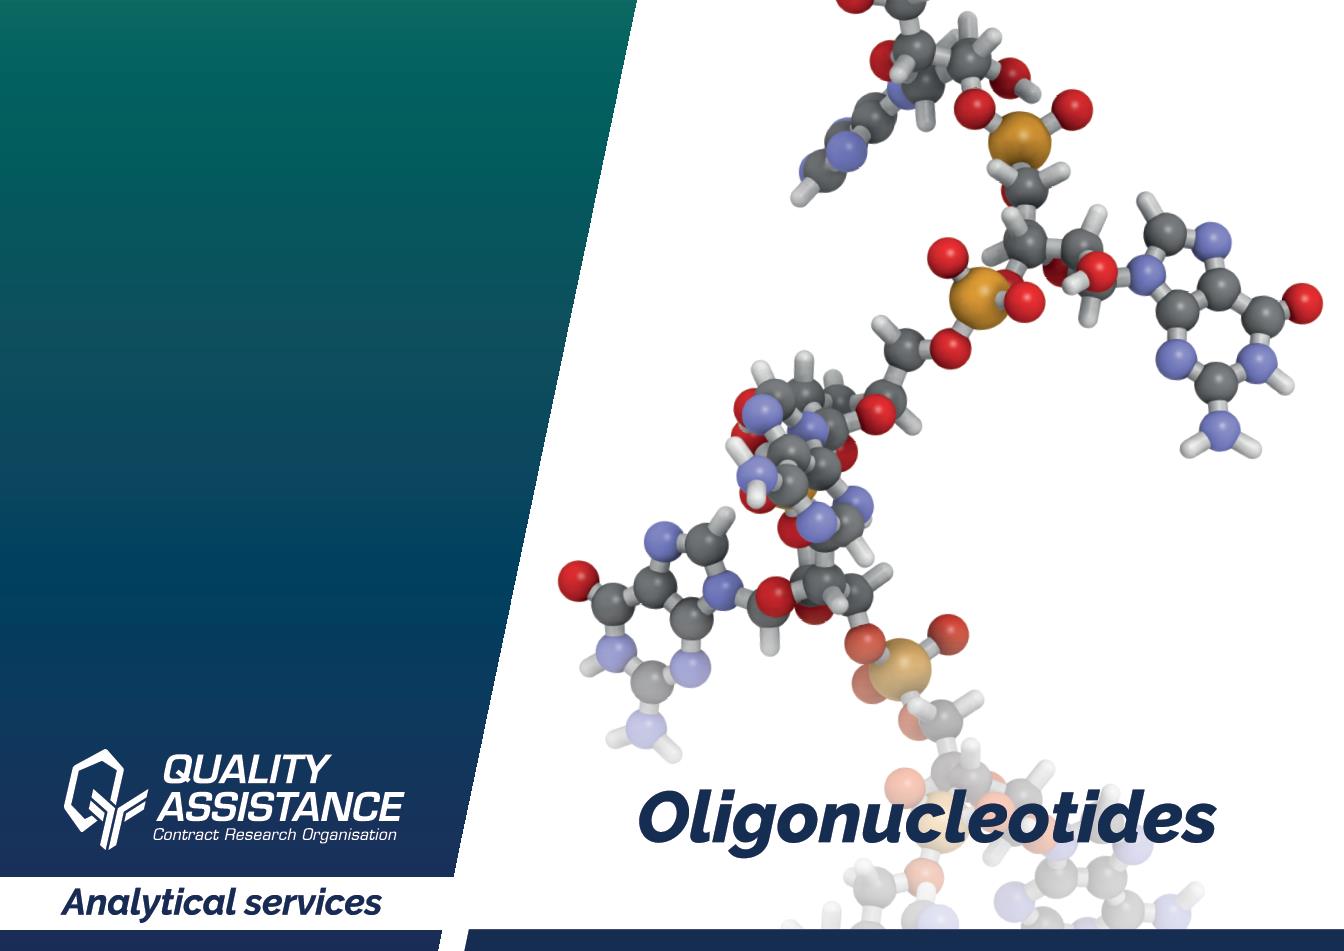 Learn more on our Oligonucleotides expertise